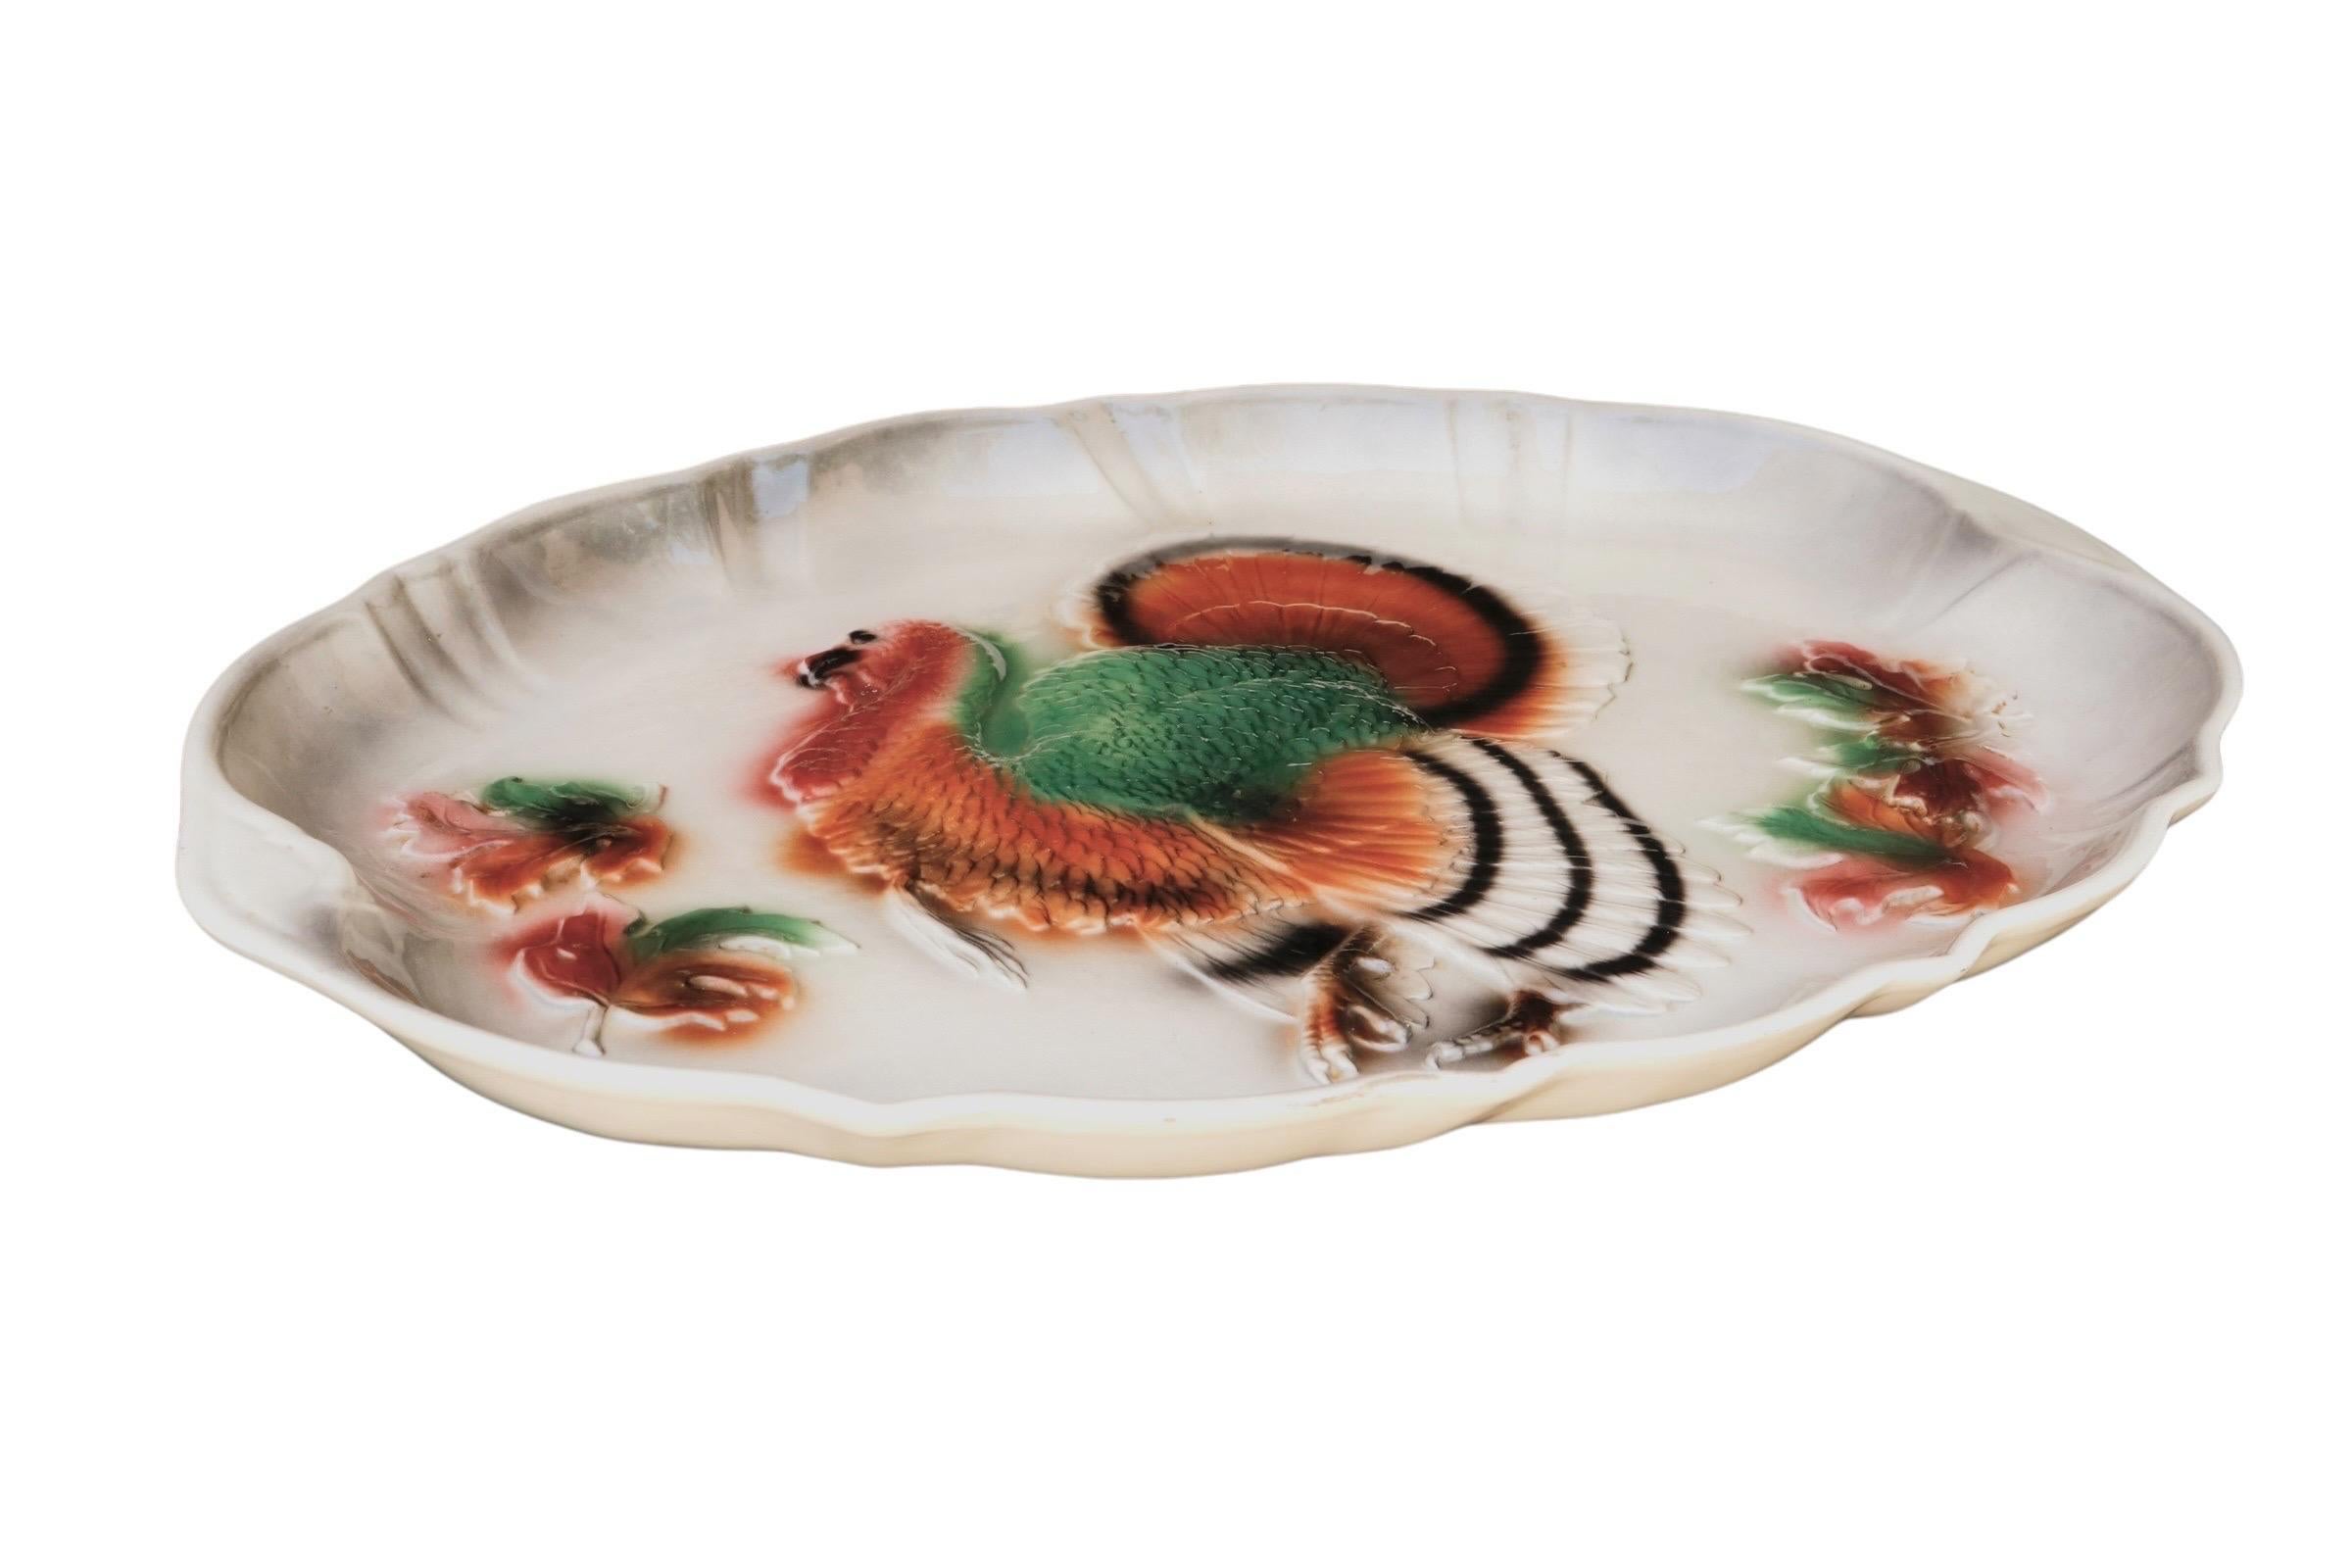 A 1958 ceramic platter made by Lane & Company of Van Nuys, California. The oval platter has an embossed turkey in the center, with fall leaves to each side, and a serpentine raised edge. Airbrushed in brown and green with black details. Marked